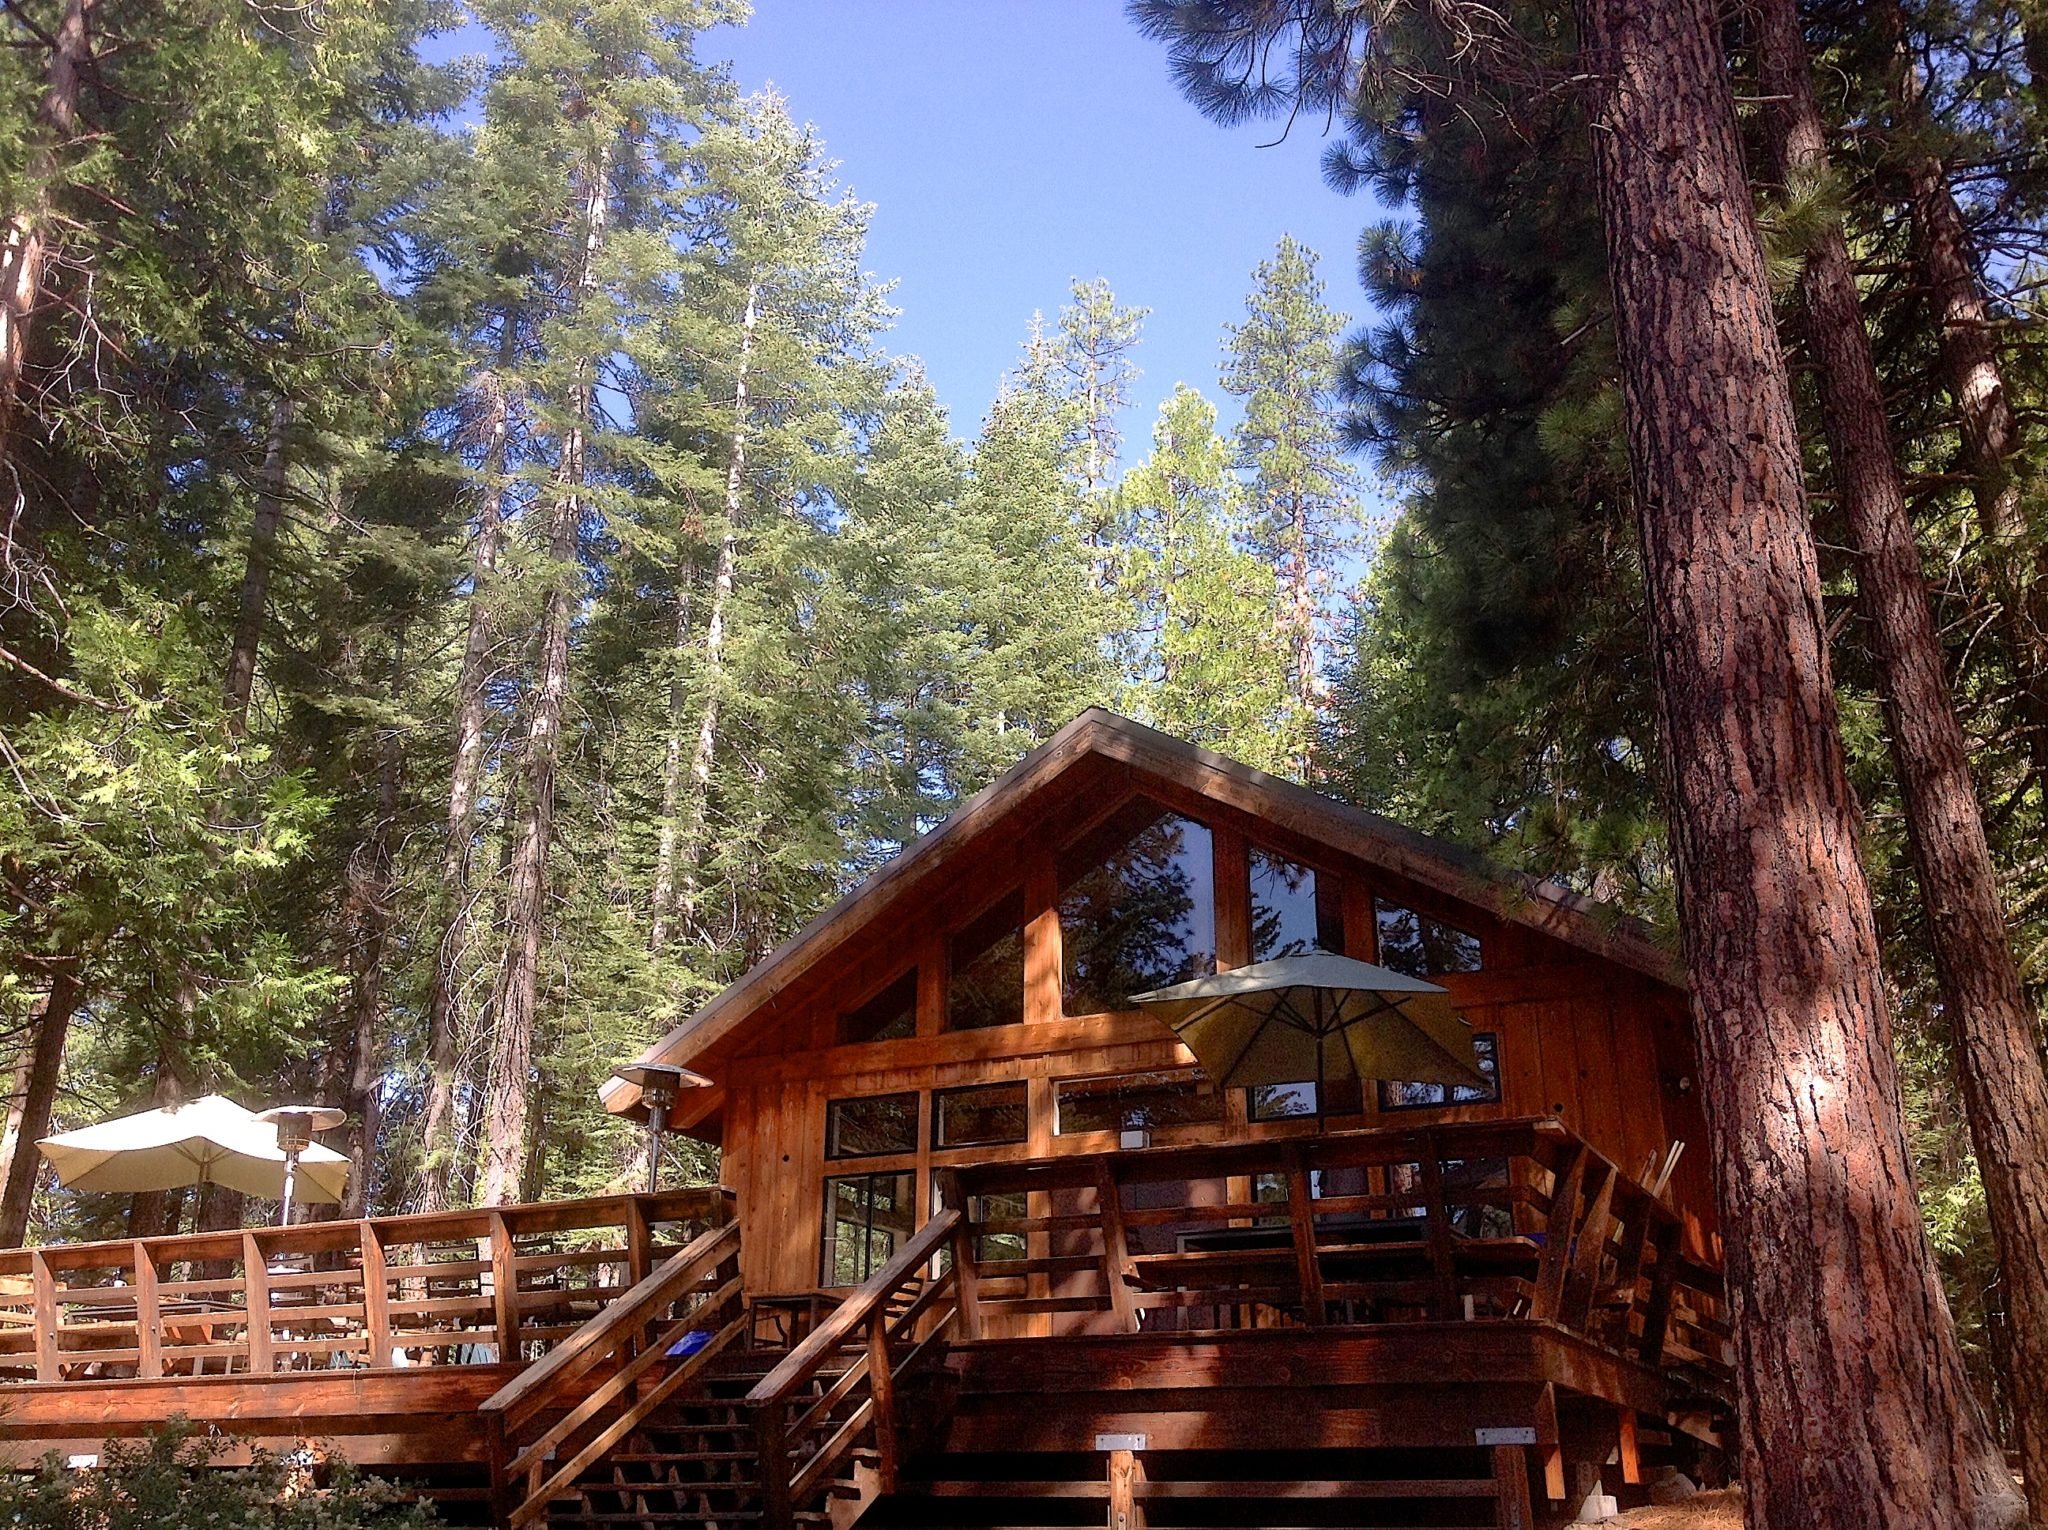 Wide shot of Vista Lodge nestled in the pine trees